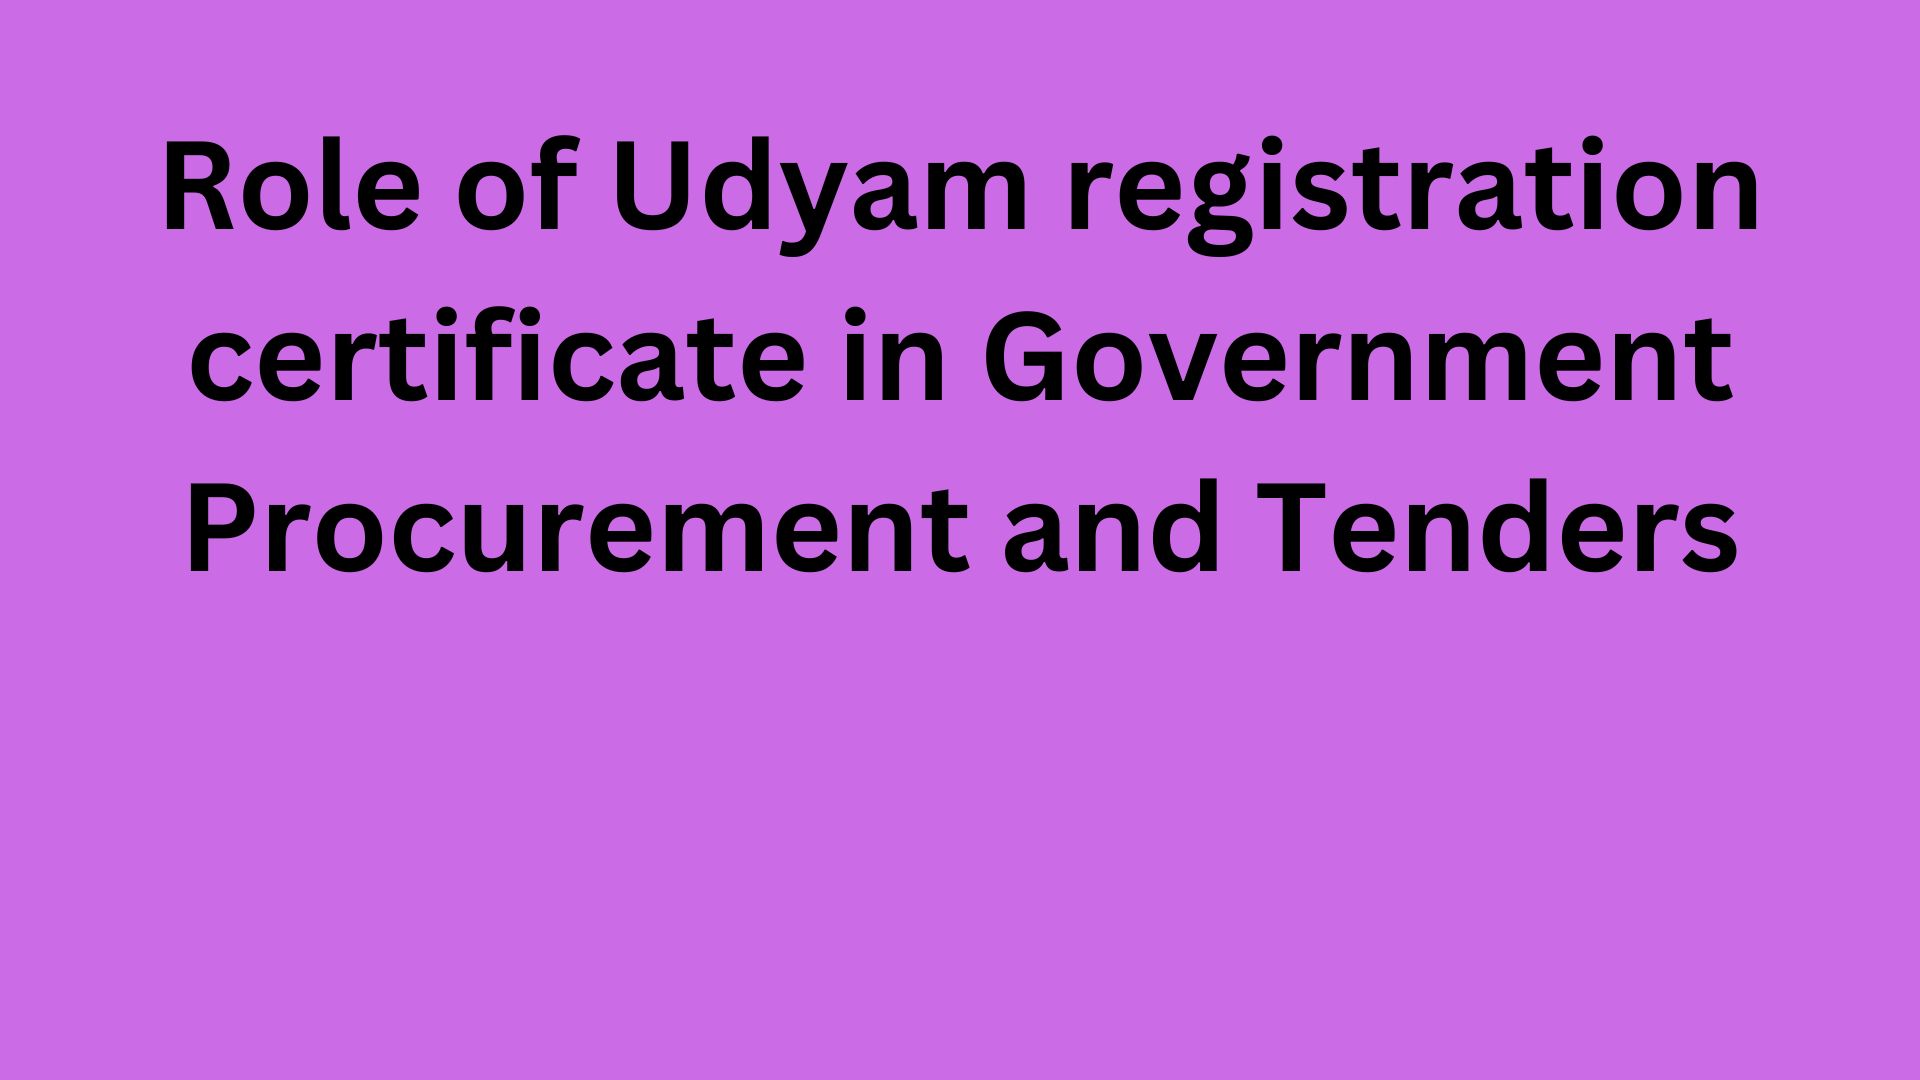 Role of Udyam registration certificate in Government Procurement and Tenders